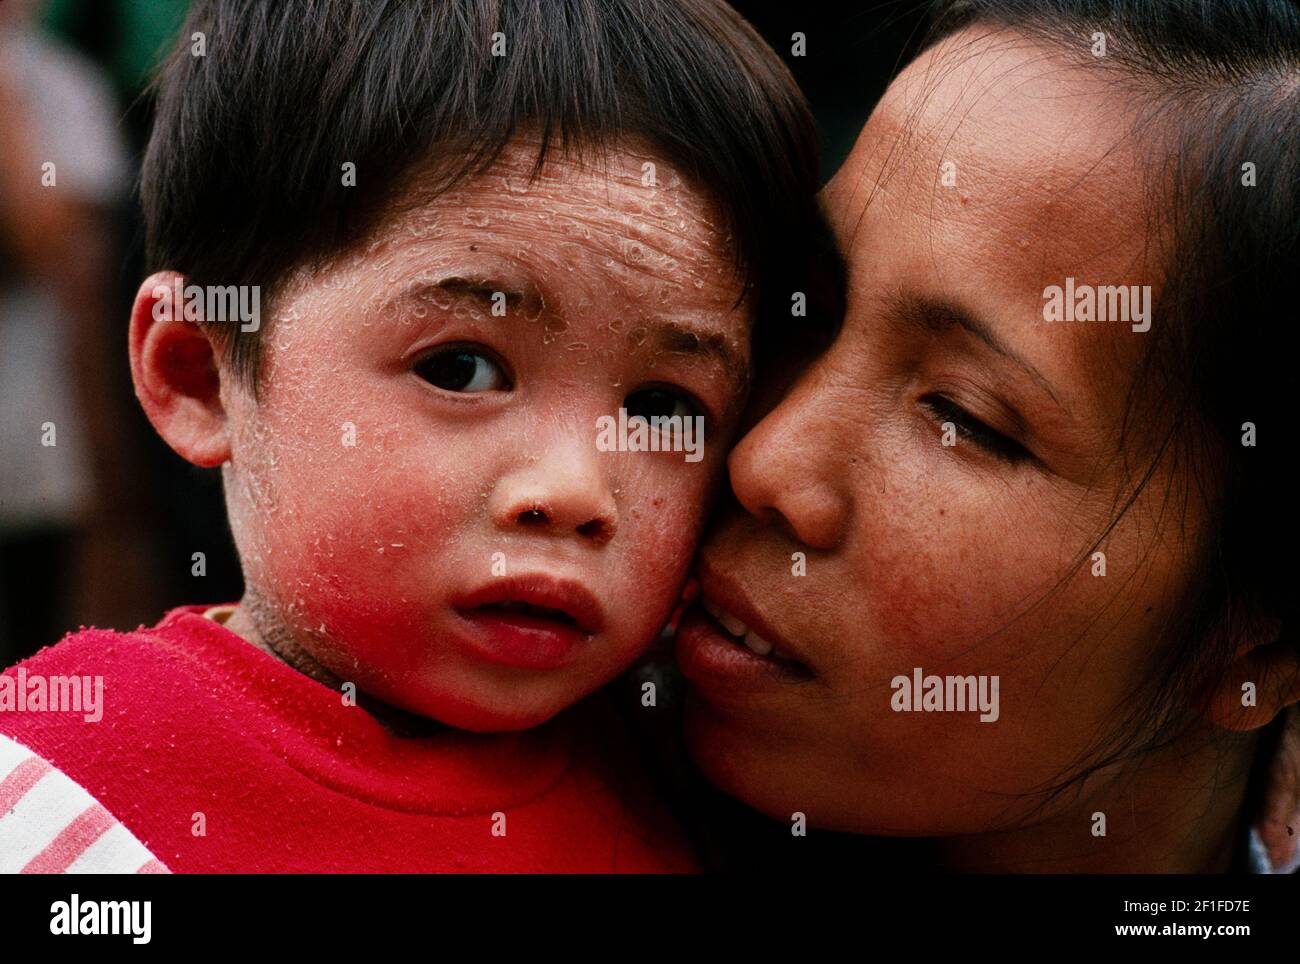 A young boy with skin peeling issue, Children's Hospital, Hanoi, North Vietnam, June 1980 Stock Photo